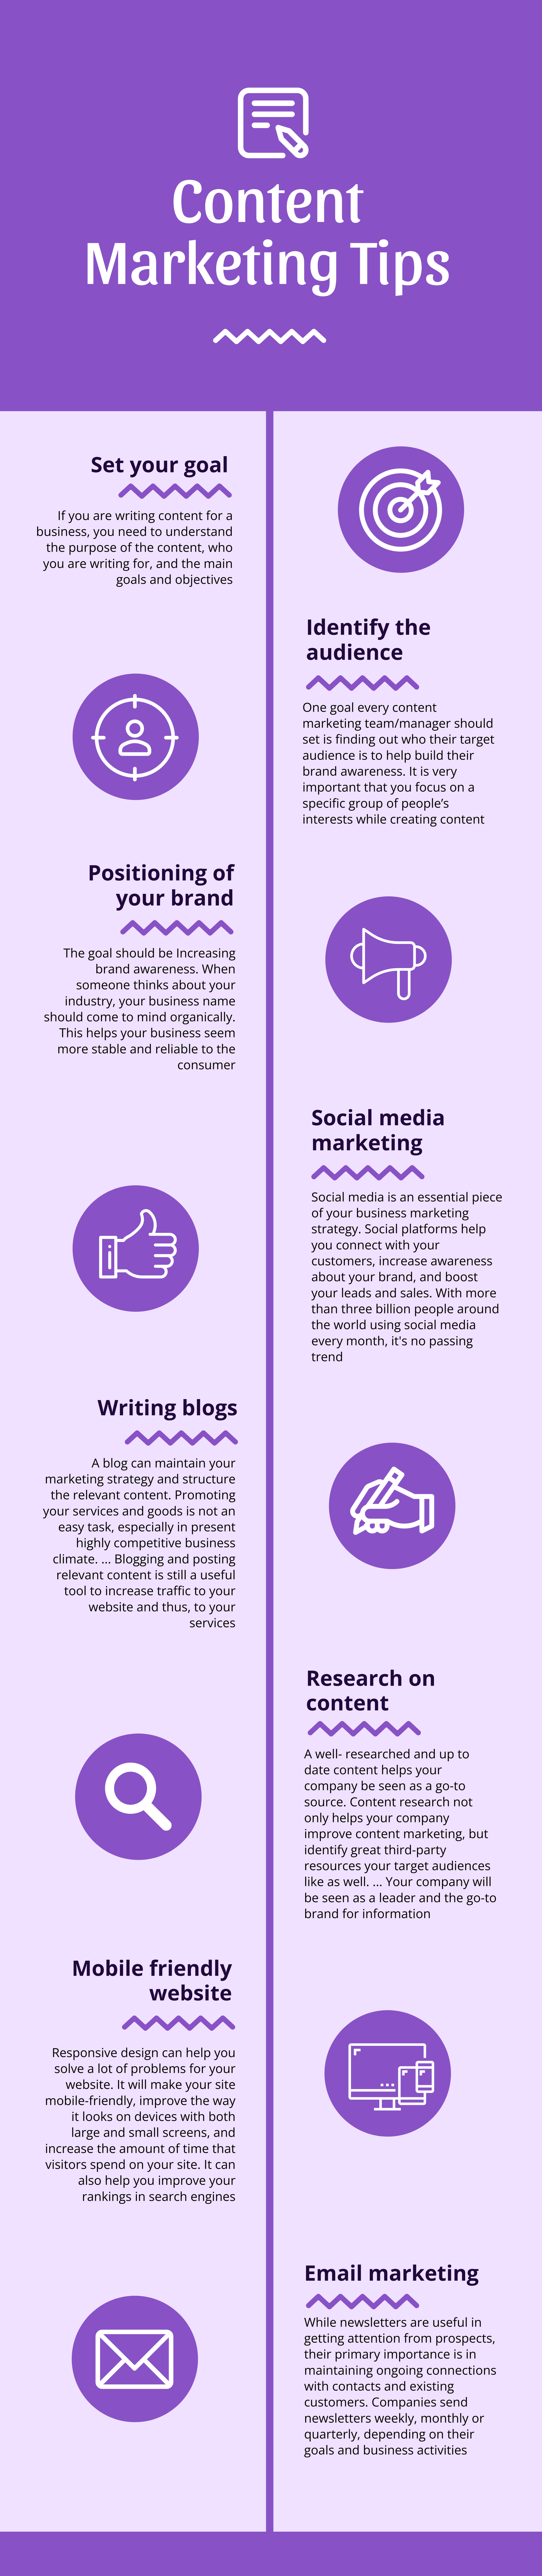 Infographic Template with Content Marketing Tips